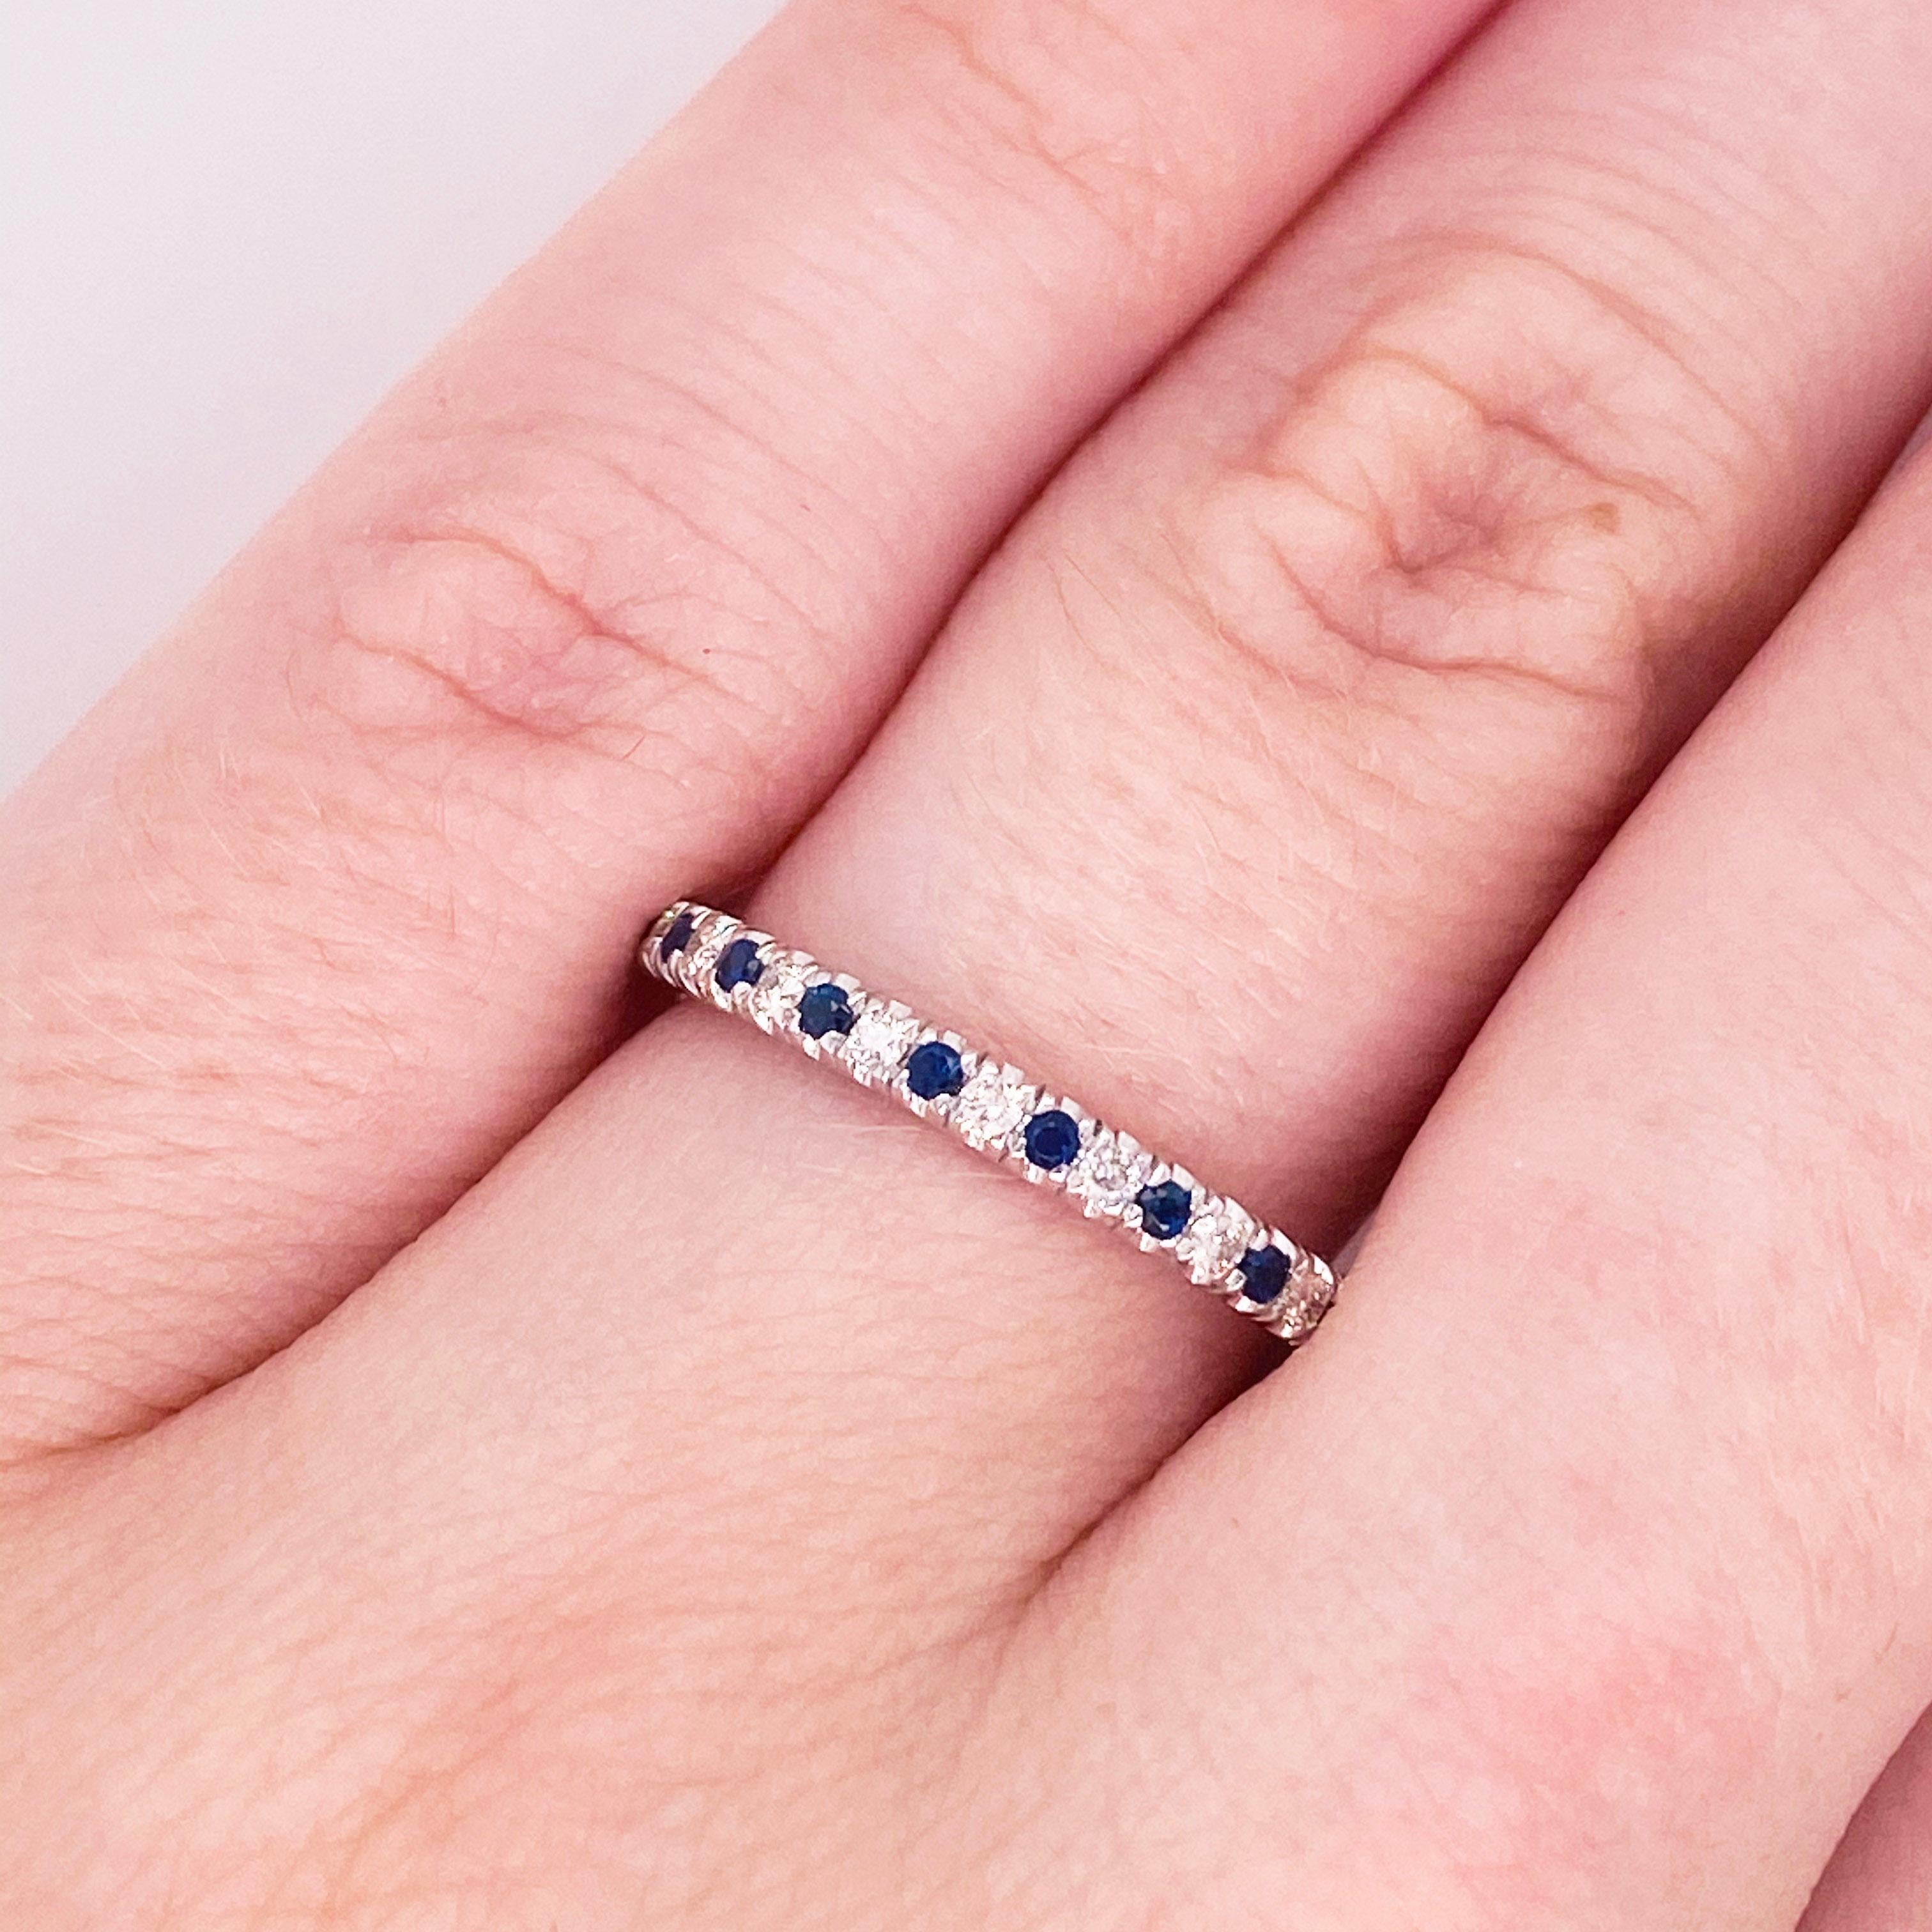 These stunning rich blue sapphires and white diamonds set in polished 14k white gold provide a look that is very classic and modern at the same time! This ring is very fashionable and can add a touch of style to any outfit, yet it is also classy